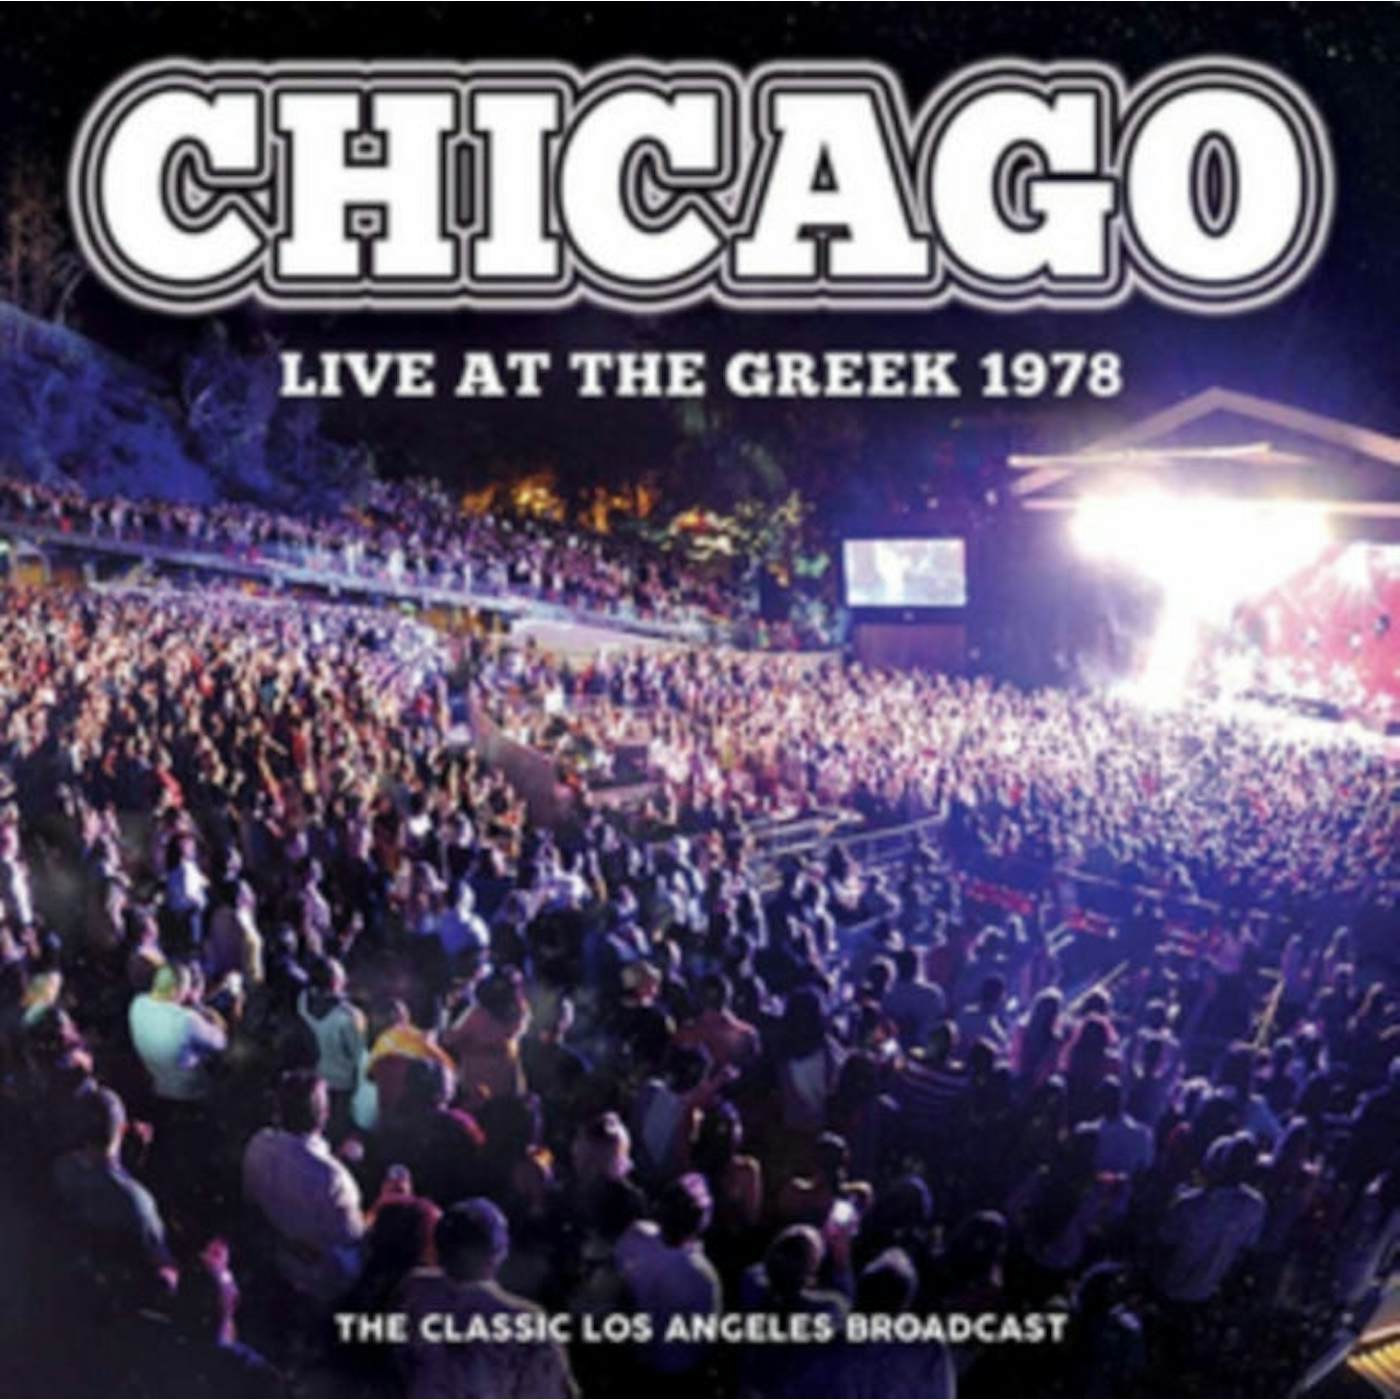 Chicago CD - Live At The Greek 1978